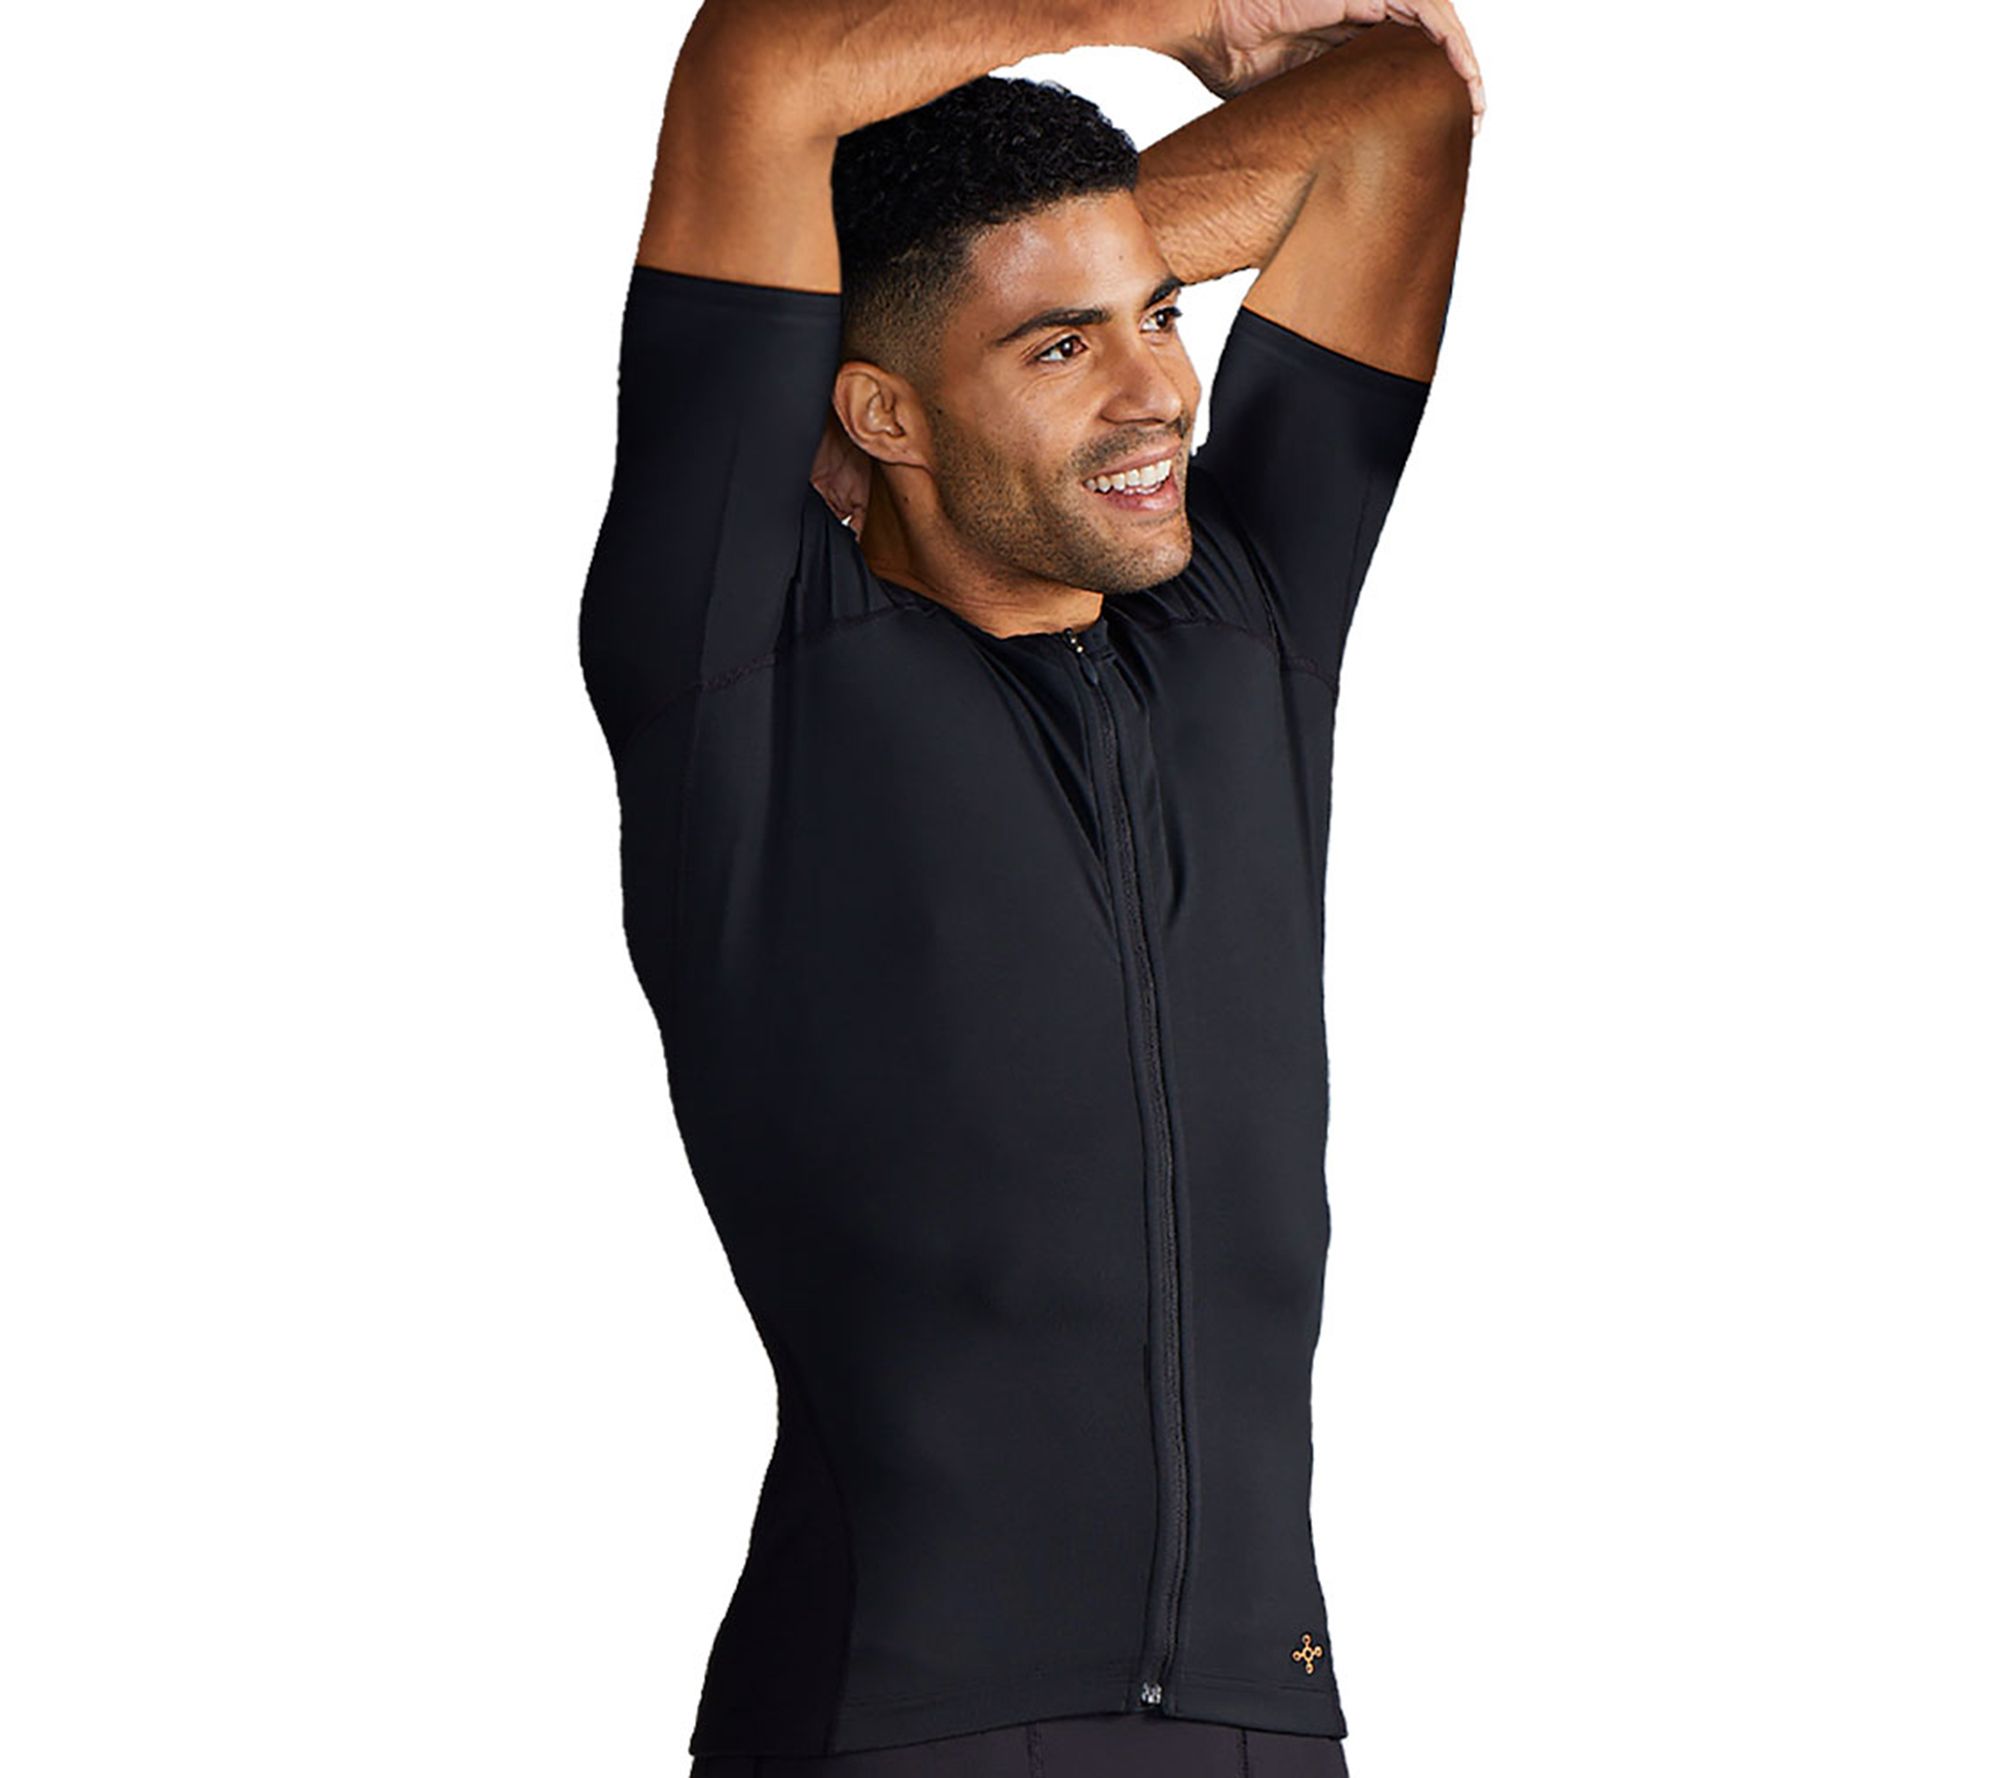 Buy 1 Get 1 50% off Compression Shirts Ends Tonight! - Tommie Copper